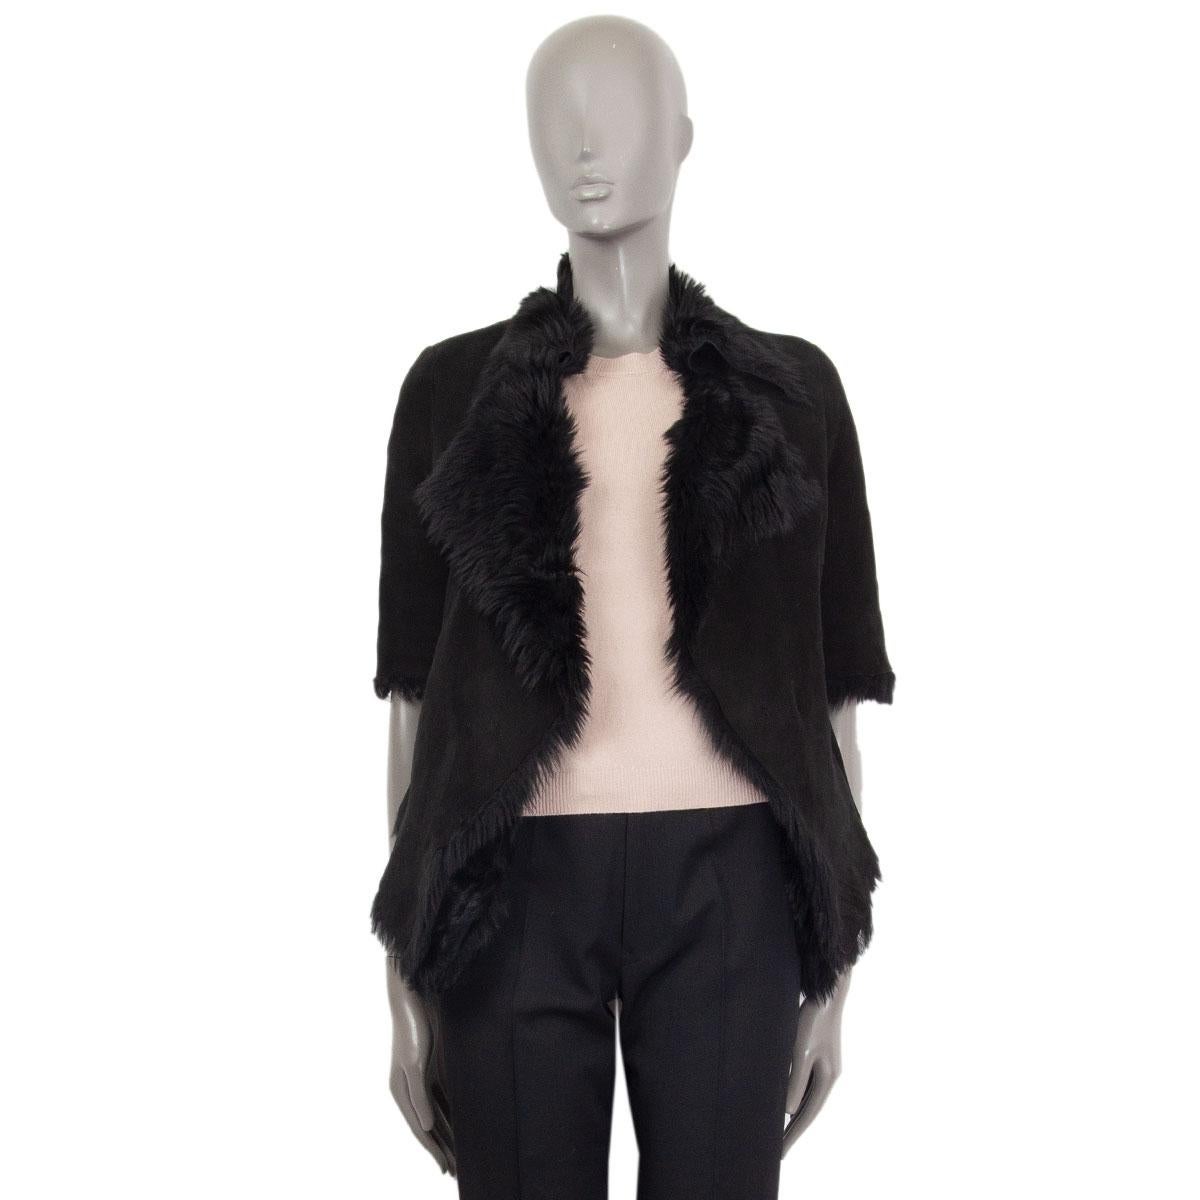 authentic Marni short sleeve shearling jacket in black lamb leather (100%). Closes with two concealed hooks on the front and has slit pockets. Has been worn and is in excellent condition.

Tag Size 38
Size XS
Shoulder Width 38cm (14.8in)
Bust 94cm